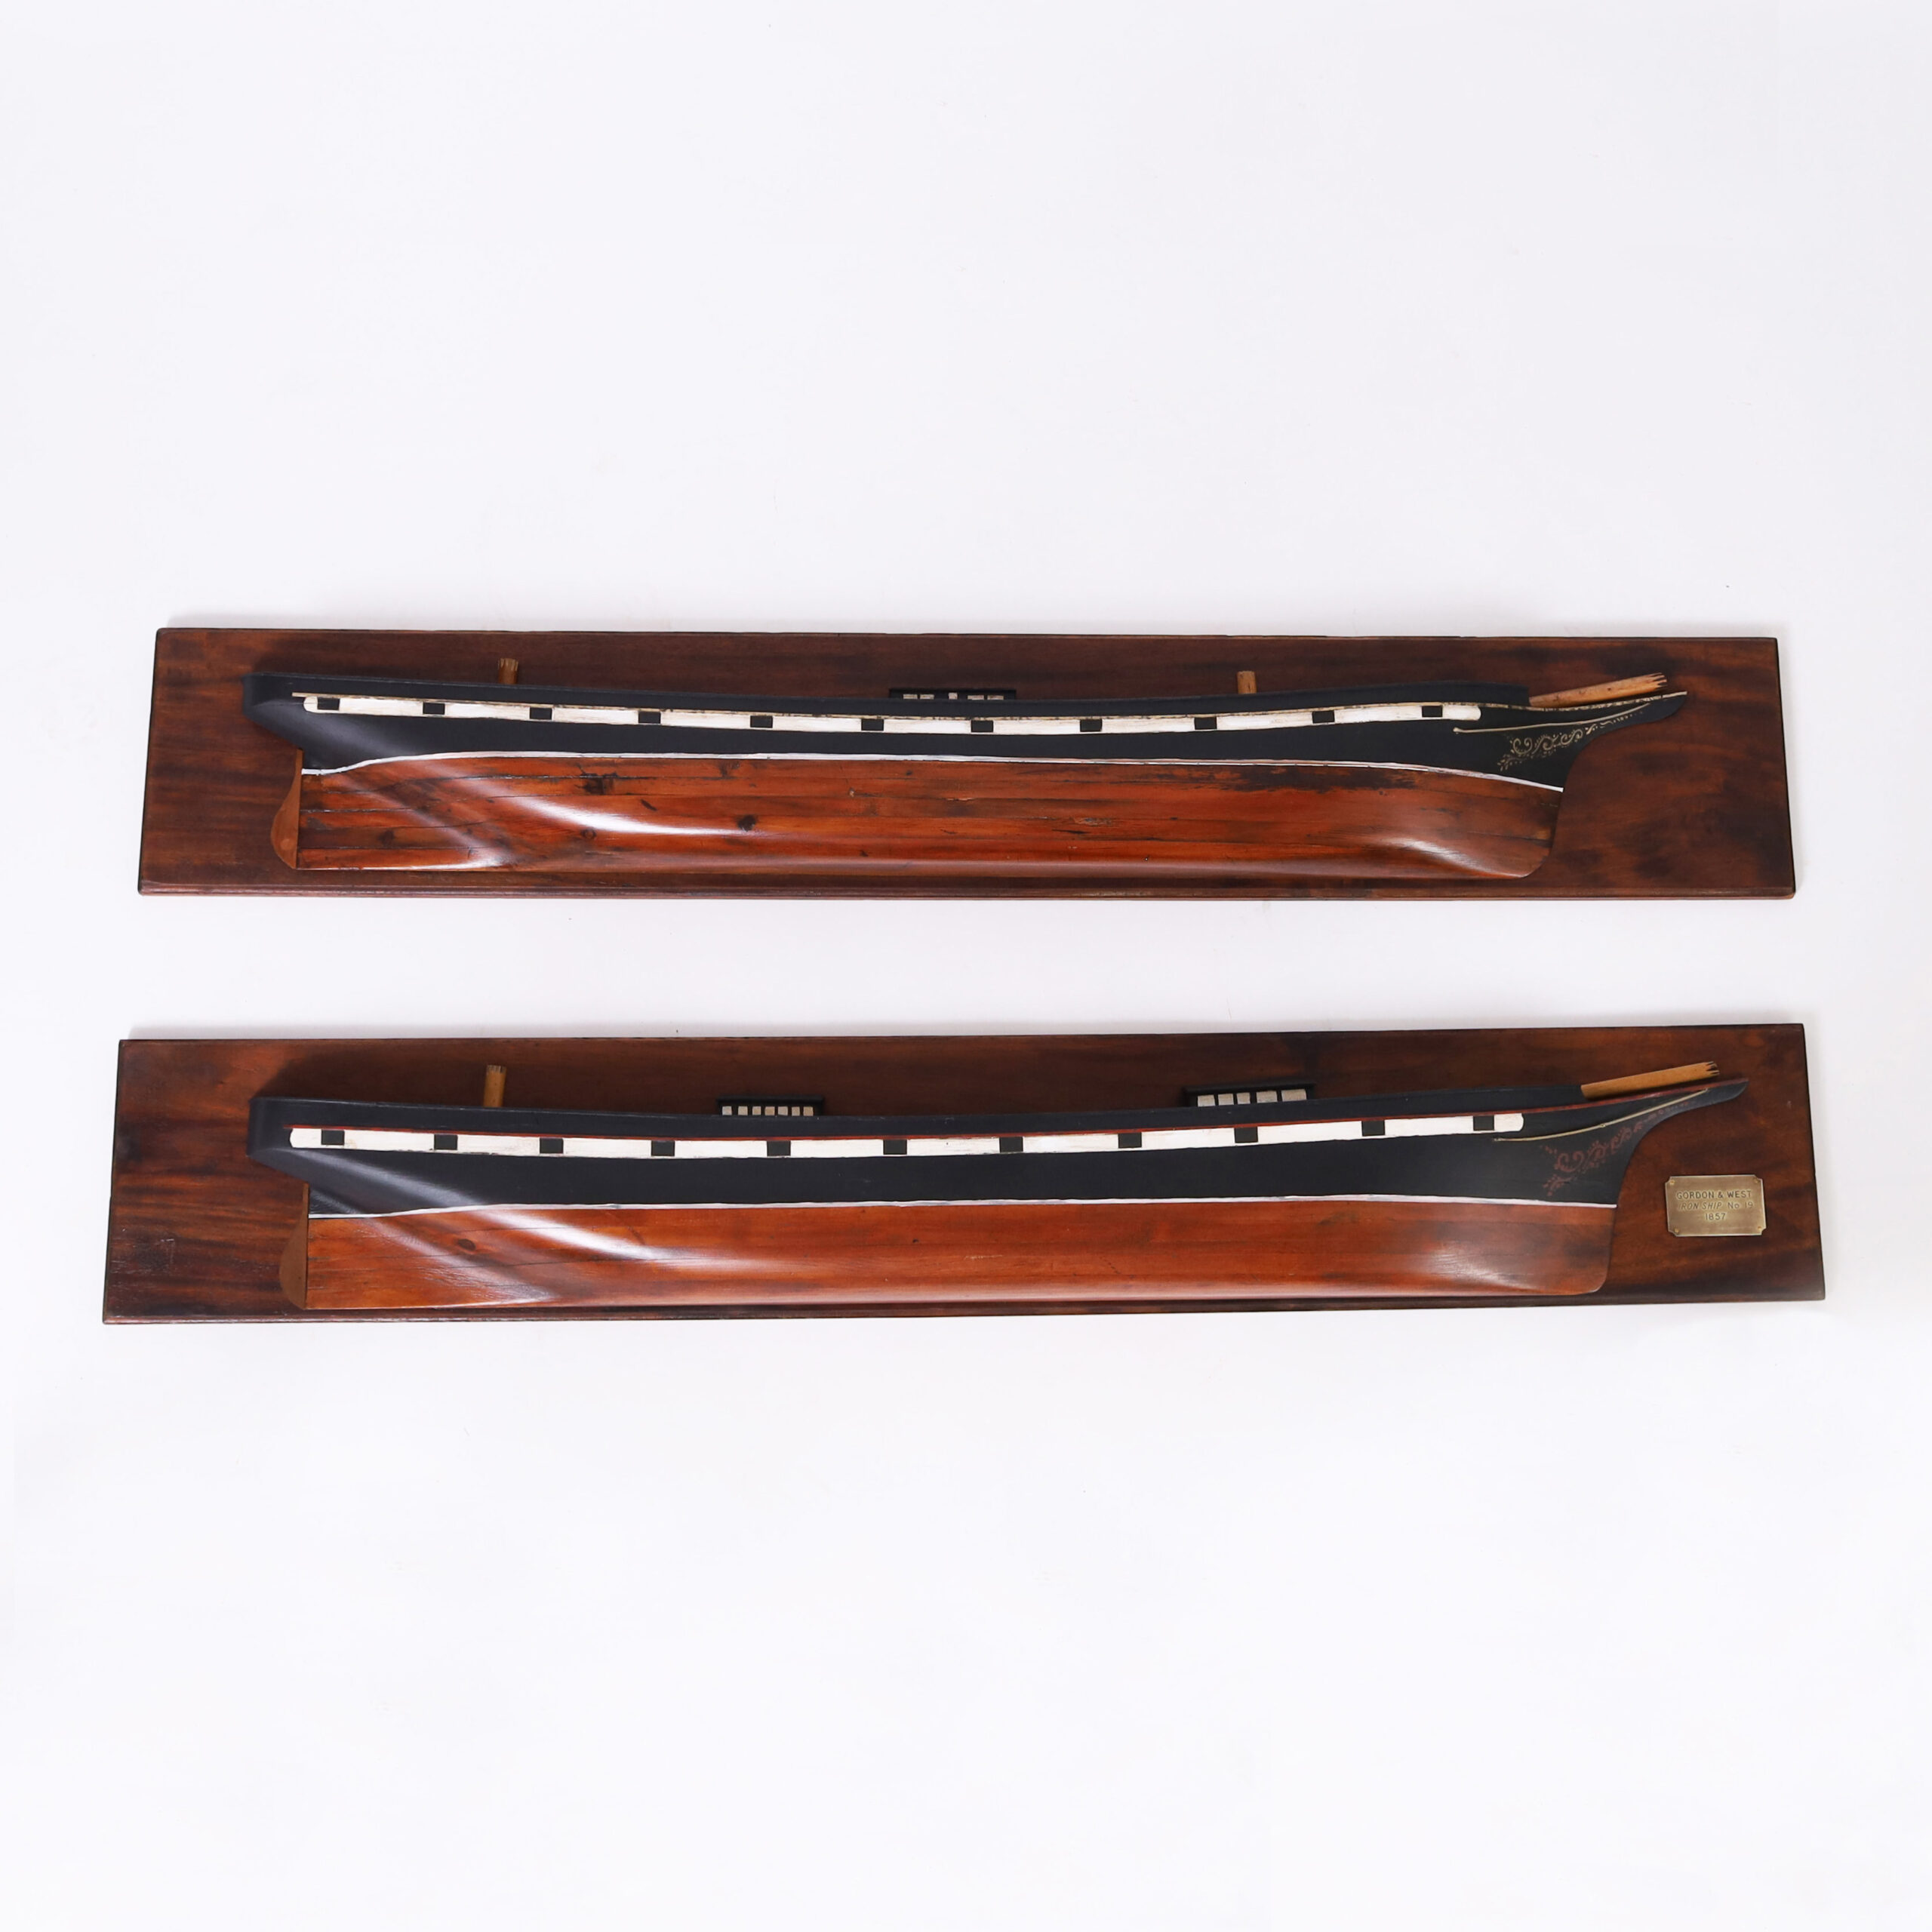 Pair of Antique Carved Wood Iron Ship Half Hull Models